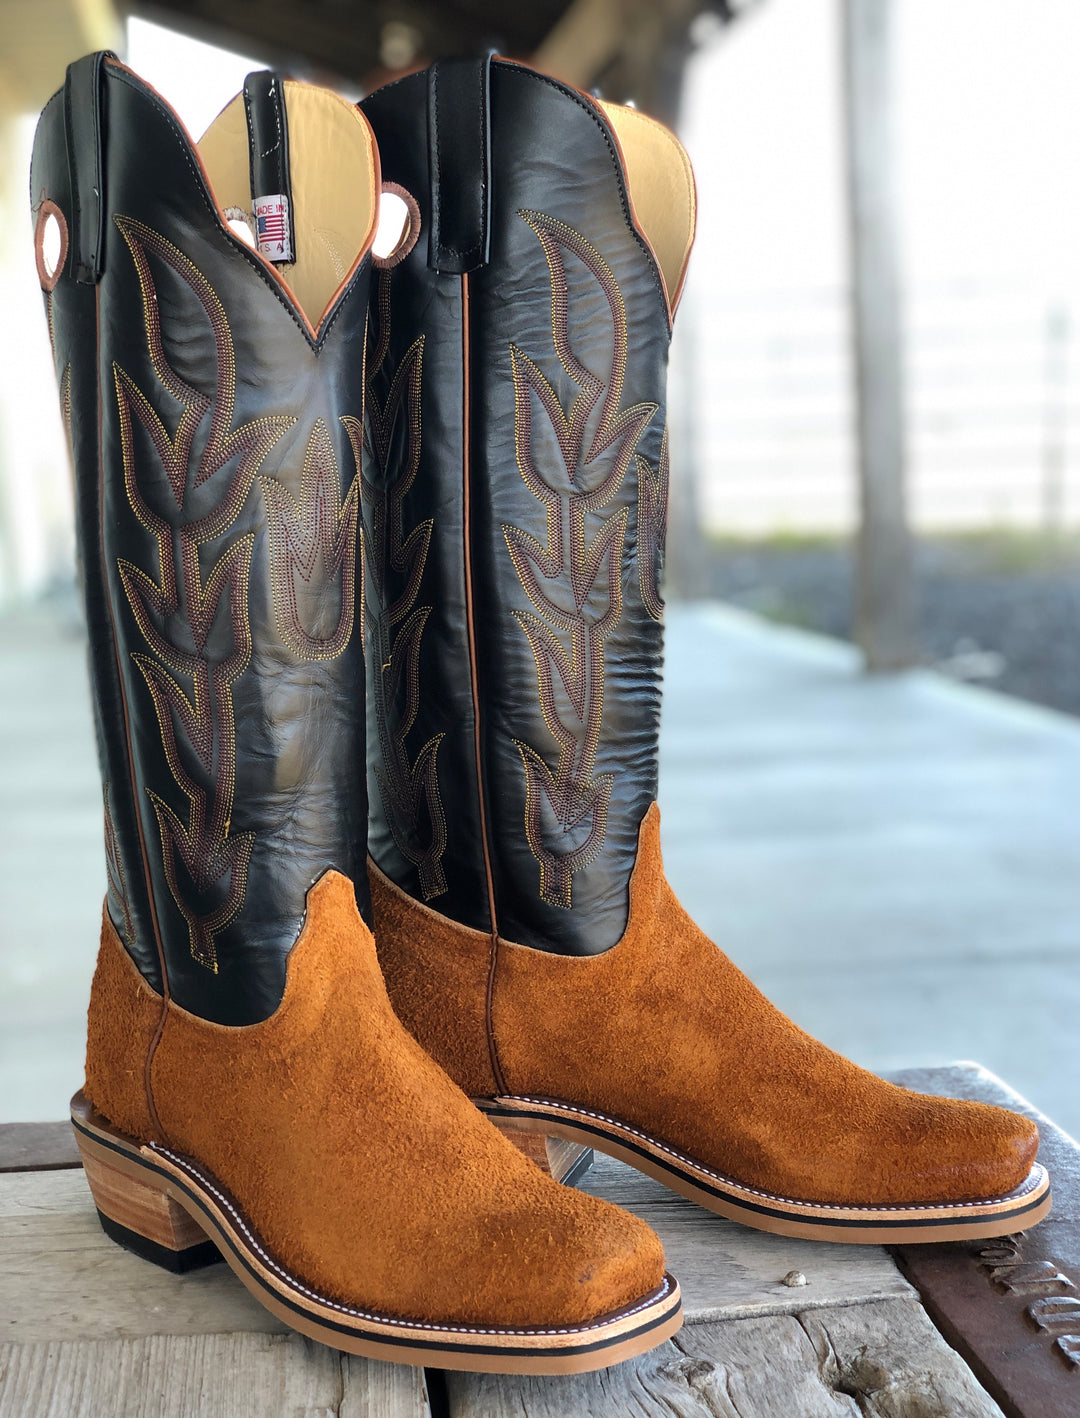 Olathe Boot Co. | Rust Crazyhorse Roughout/Black Glove Boot